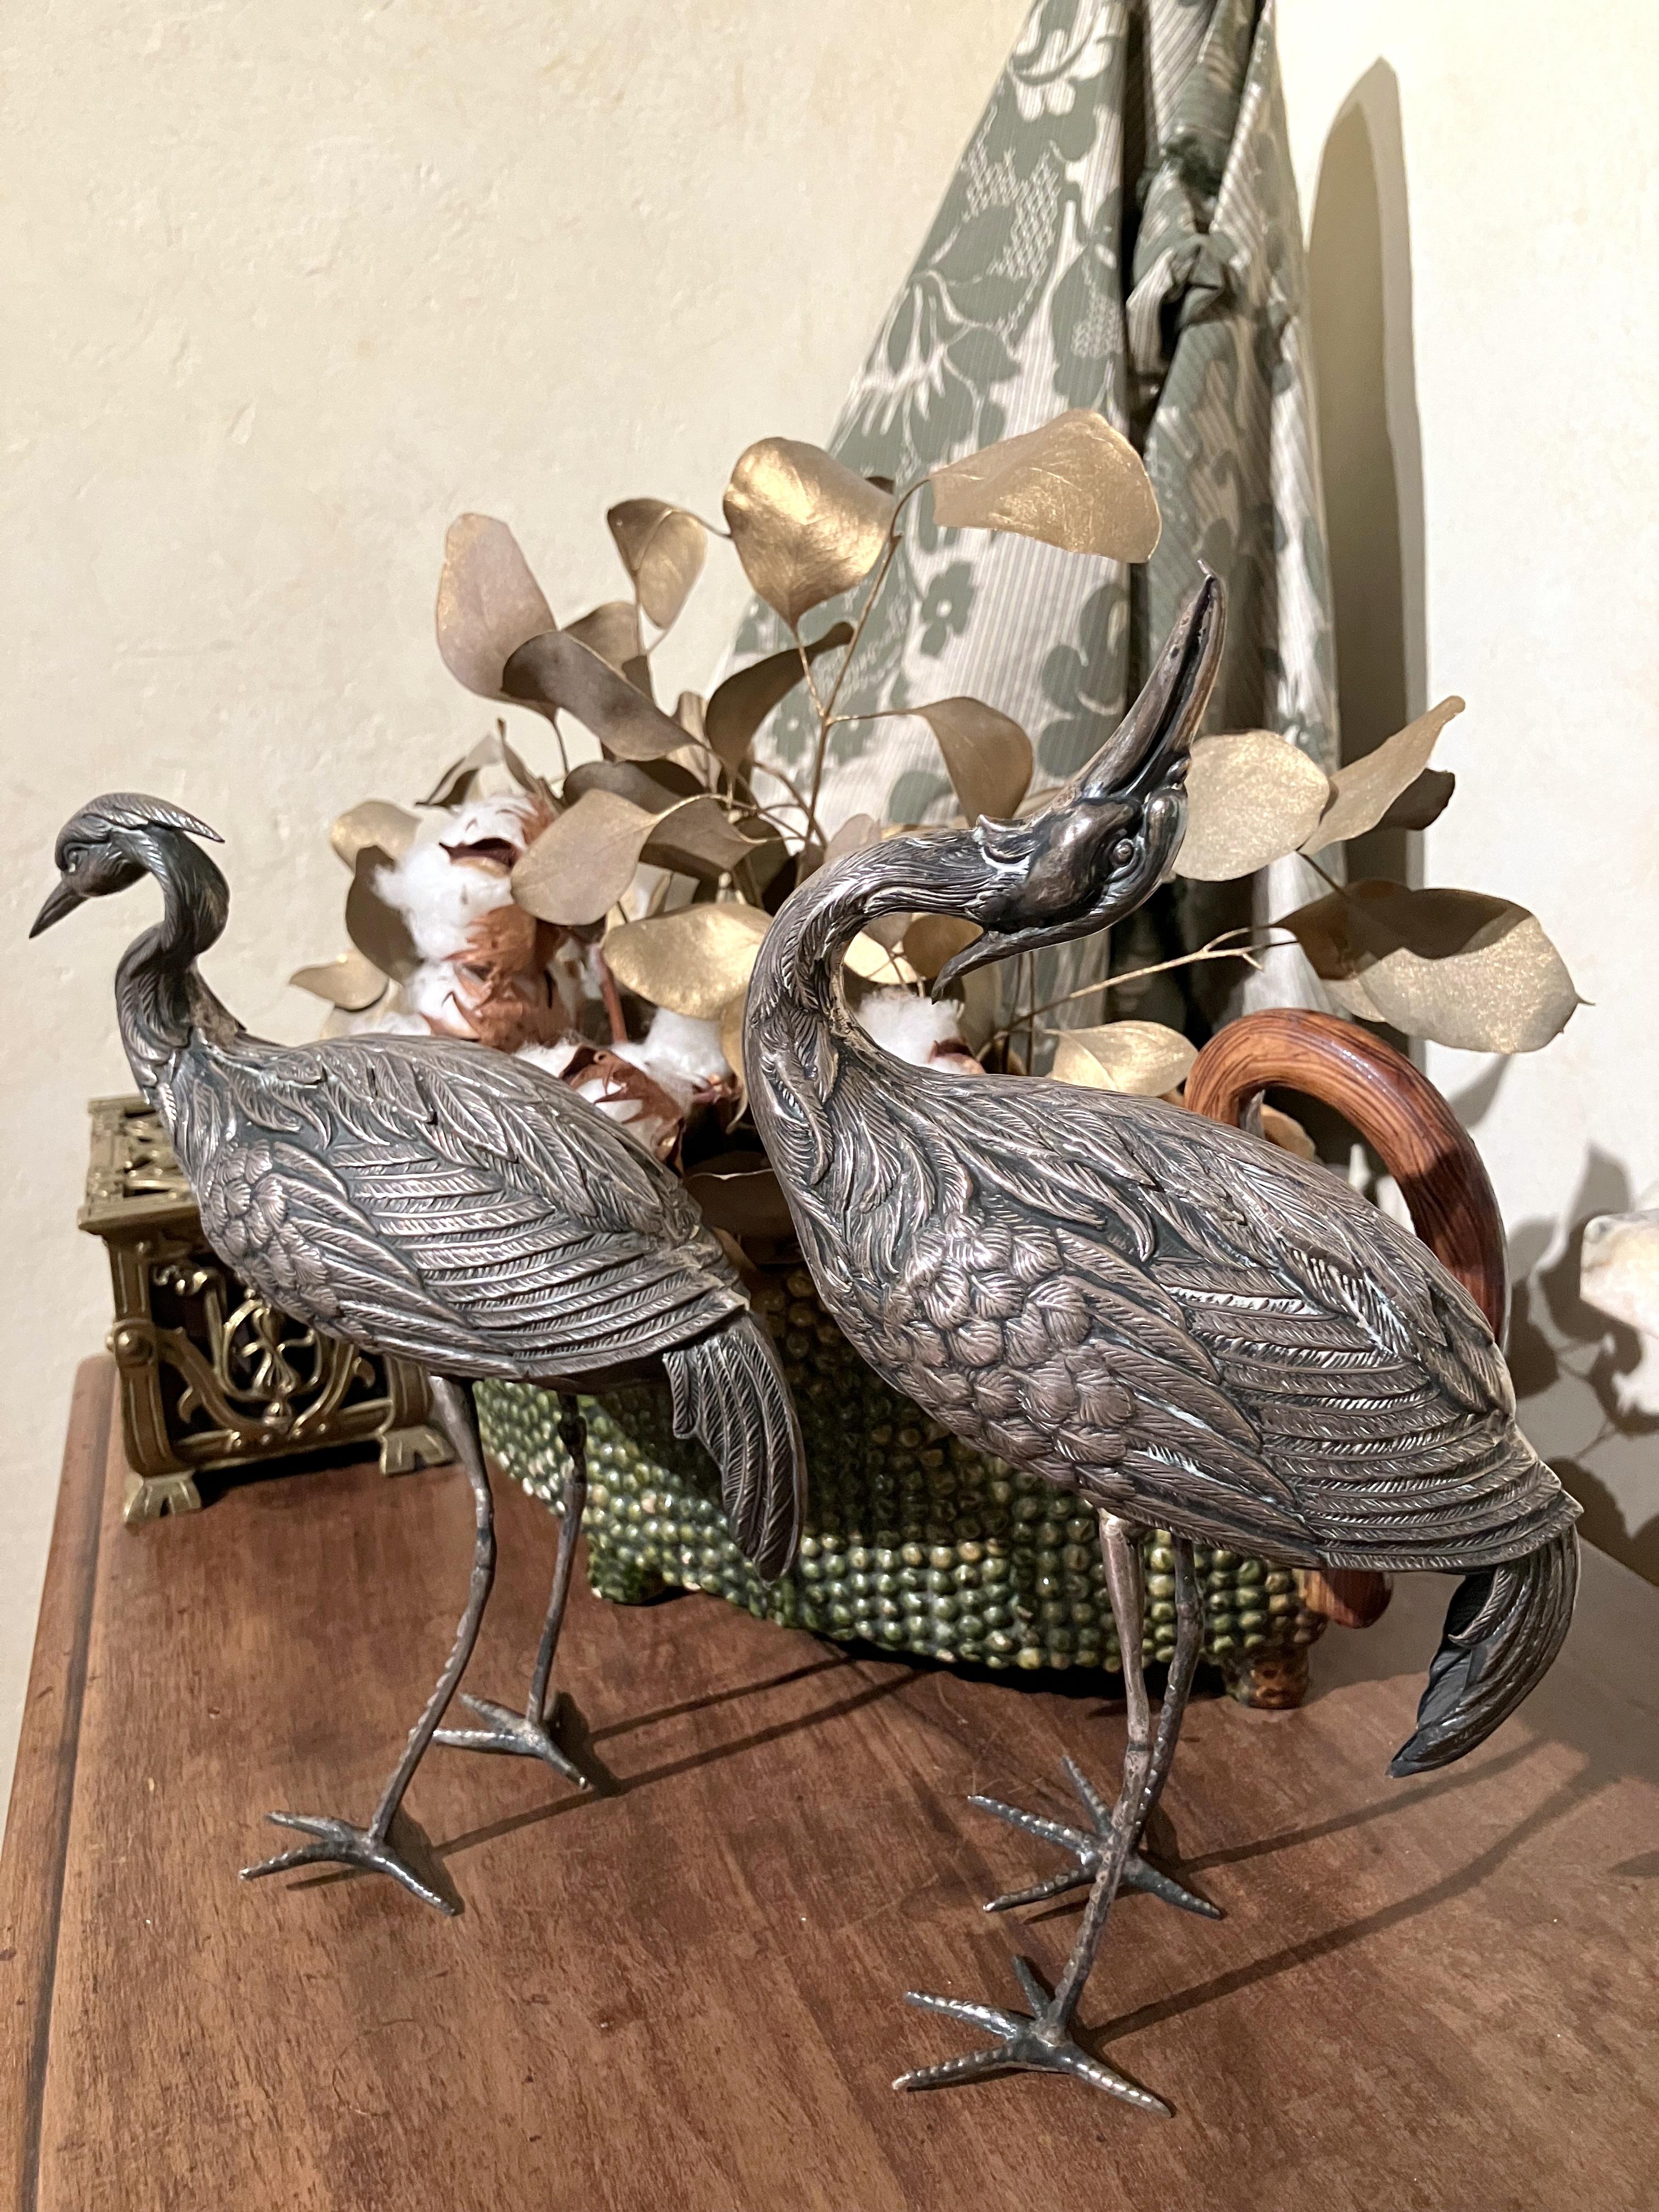 This lovely pair of vintage hand crafted Silver Herons sculptures can be dated to the early 20th century. These tiny statuettes are natural decorative elements that recall the art nouveau period and the aesthetic movement
Expertly crafted with